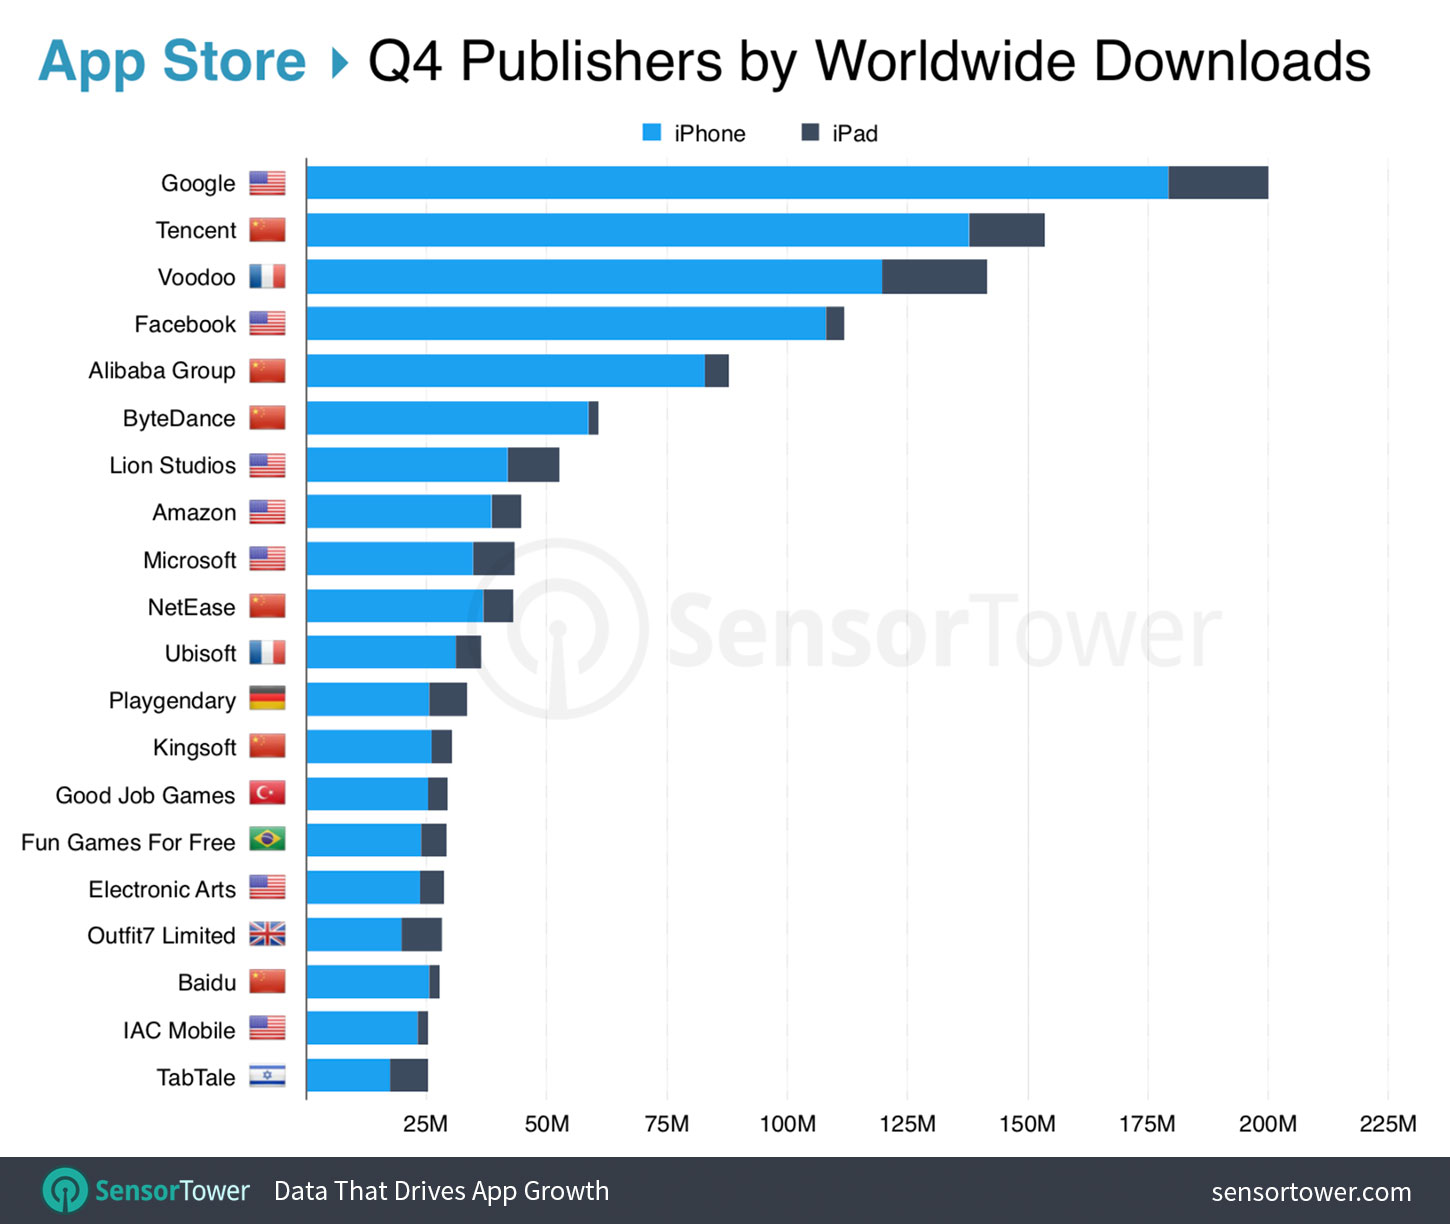 Top App Store Publishers Worldwide for Q4 2018